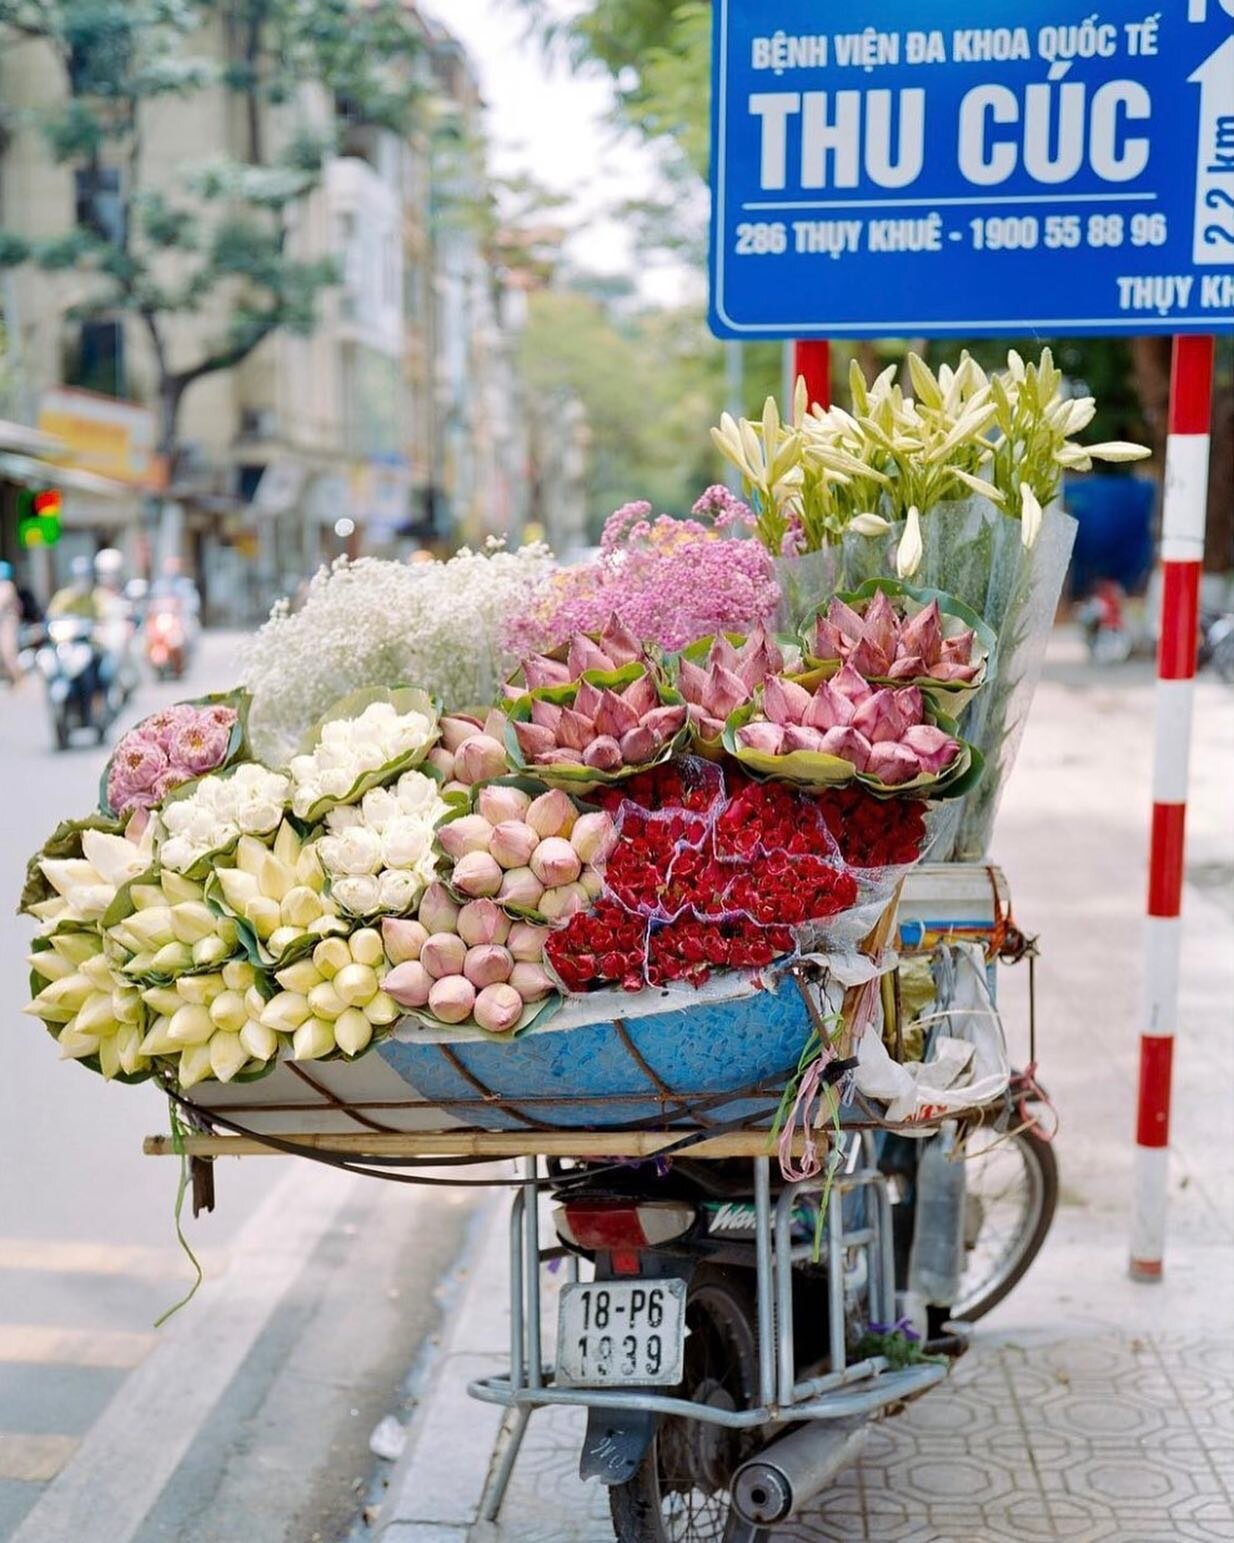 #canitellyou pimp my ride. 
This photo of a flower vendor in Hanoi was just too beautiful not to repost. Chris Wallace takes such evocative images with his camera. 
📷: @chriswallace4 / 👩🏼&zwj;🌾💐🛵
.
.
.
#flowervendorinvietnam #scenesfromhanoi #h